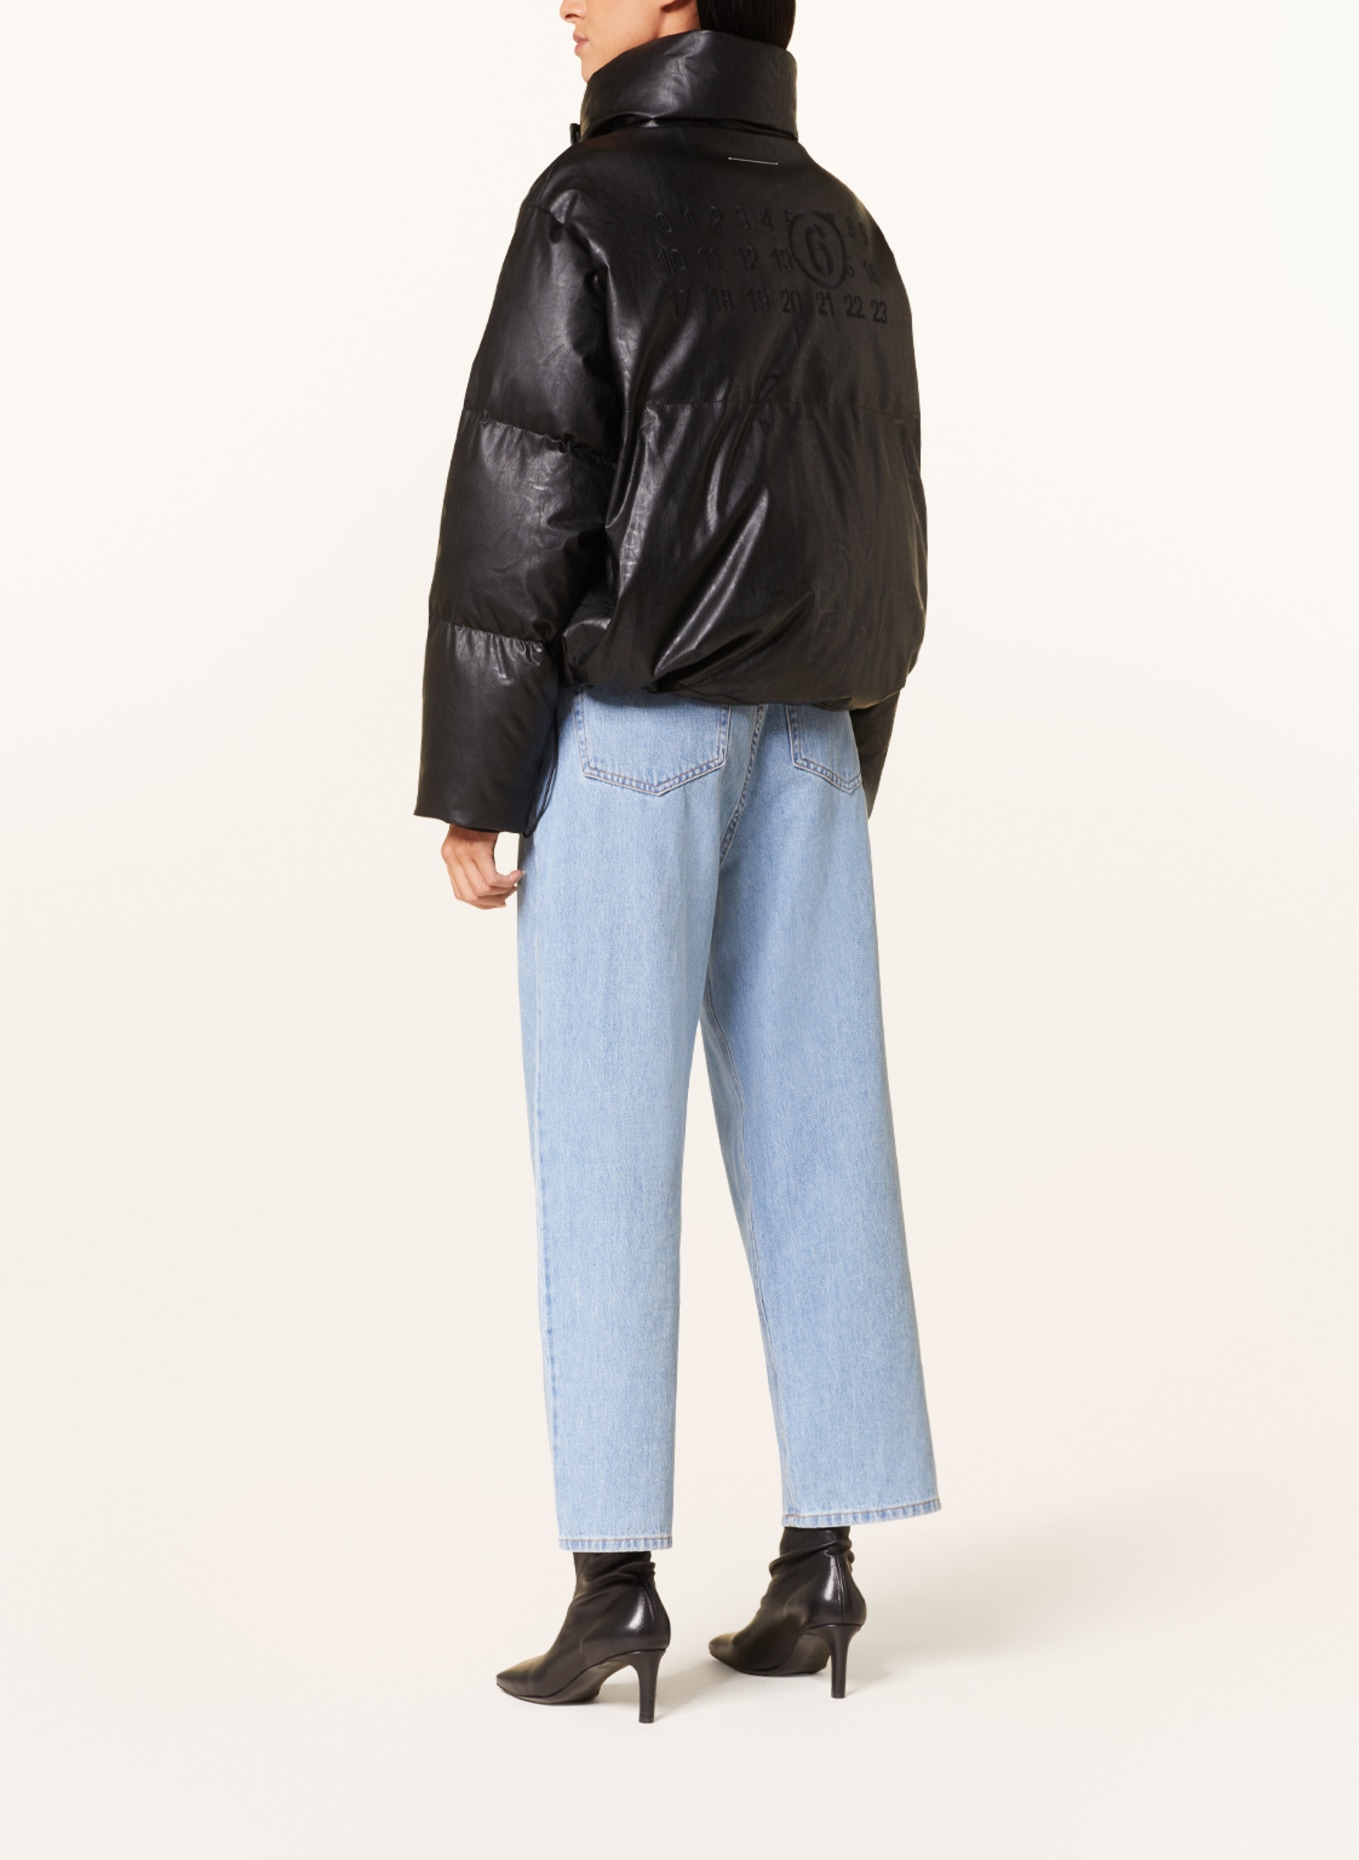 MM6 Maison Margiela Oversized down jacket in leather look, Color: BLACK (Image 3)